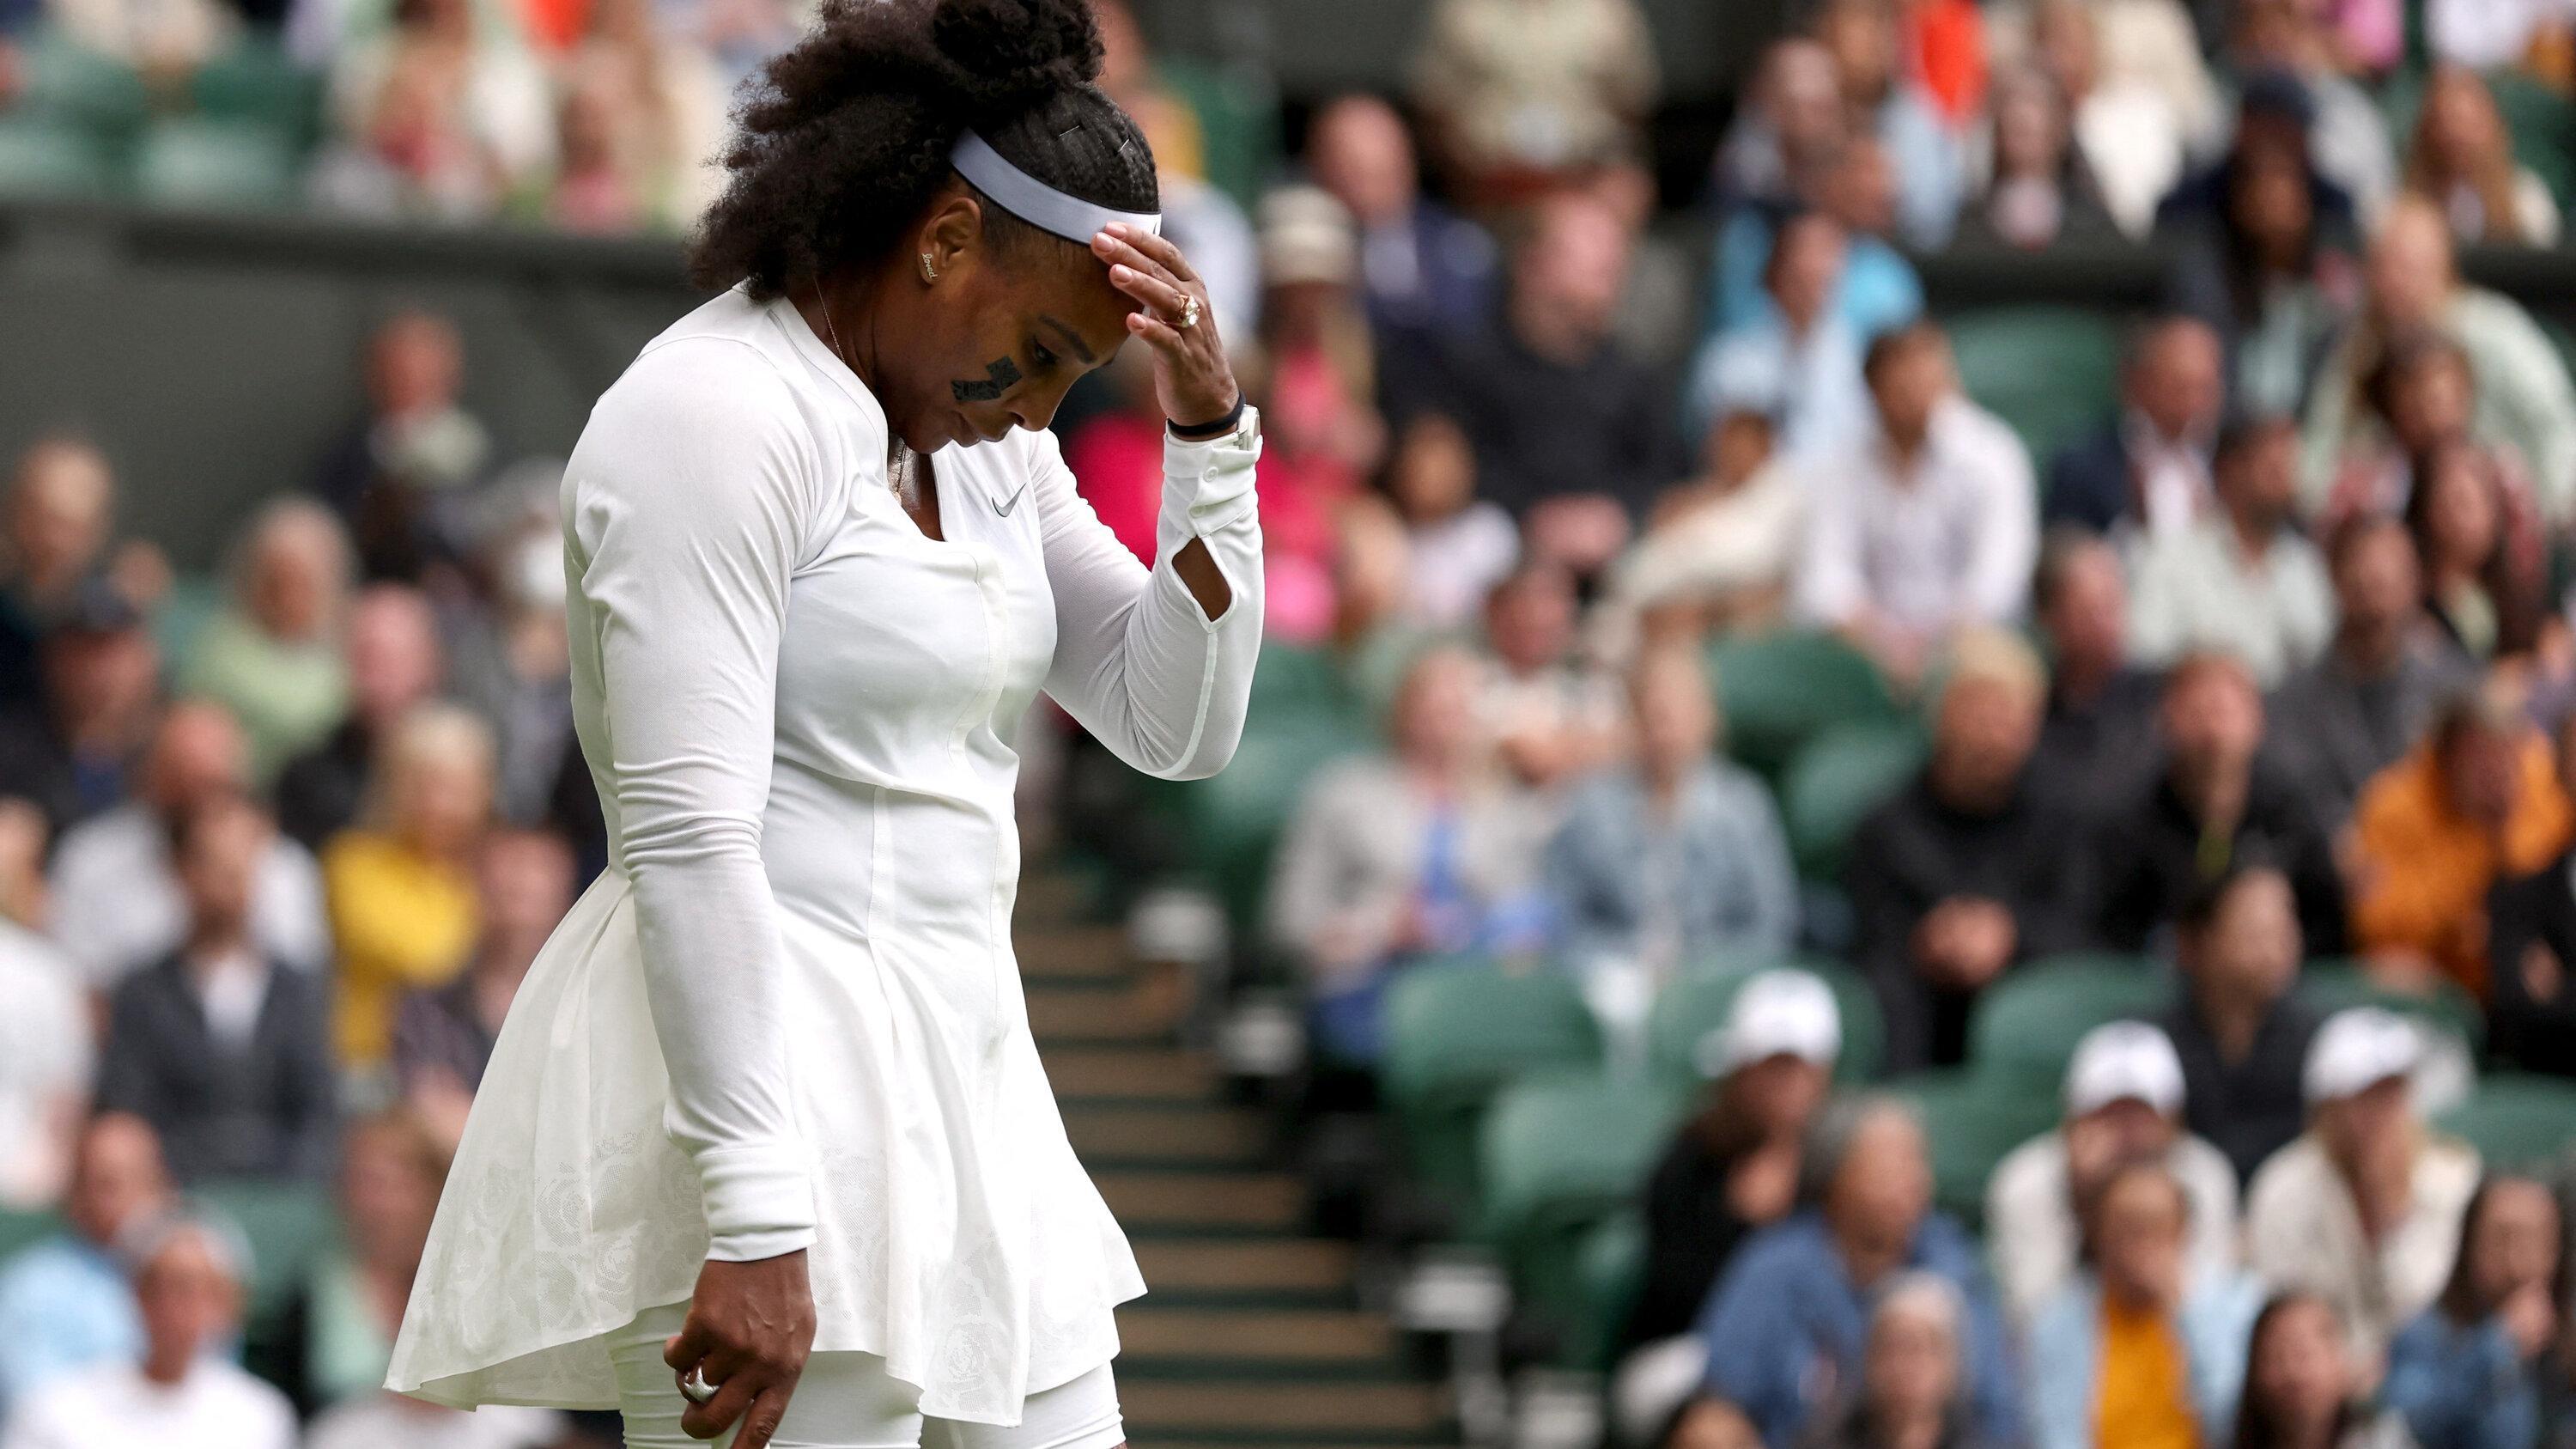 Serena Williams was beaten by Harmony Tan on her comeback to Wimbledon after a year away from the tournament.